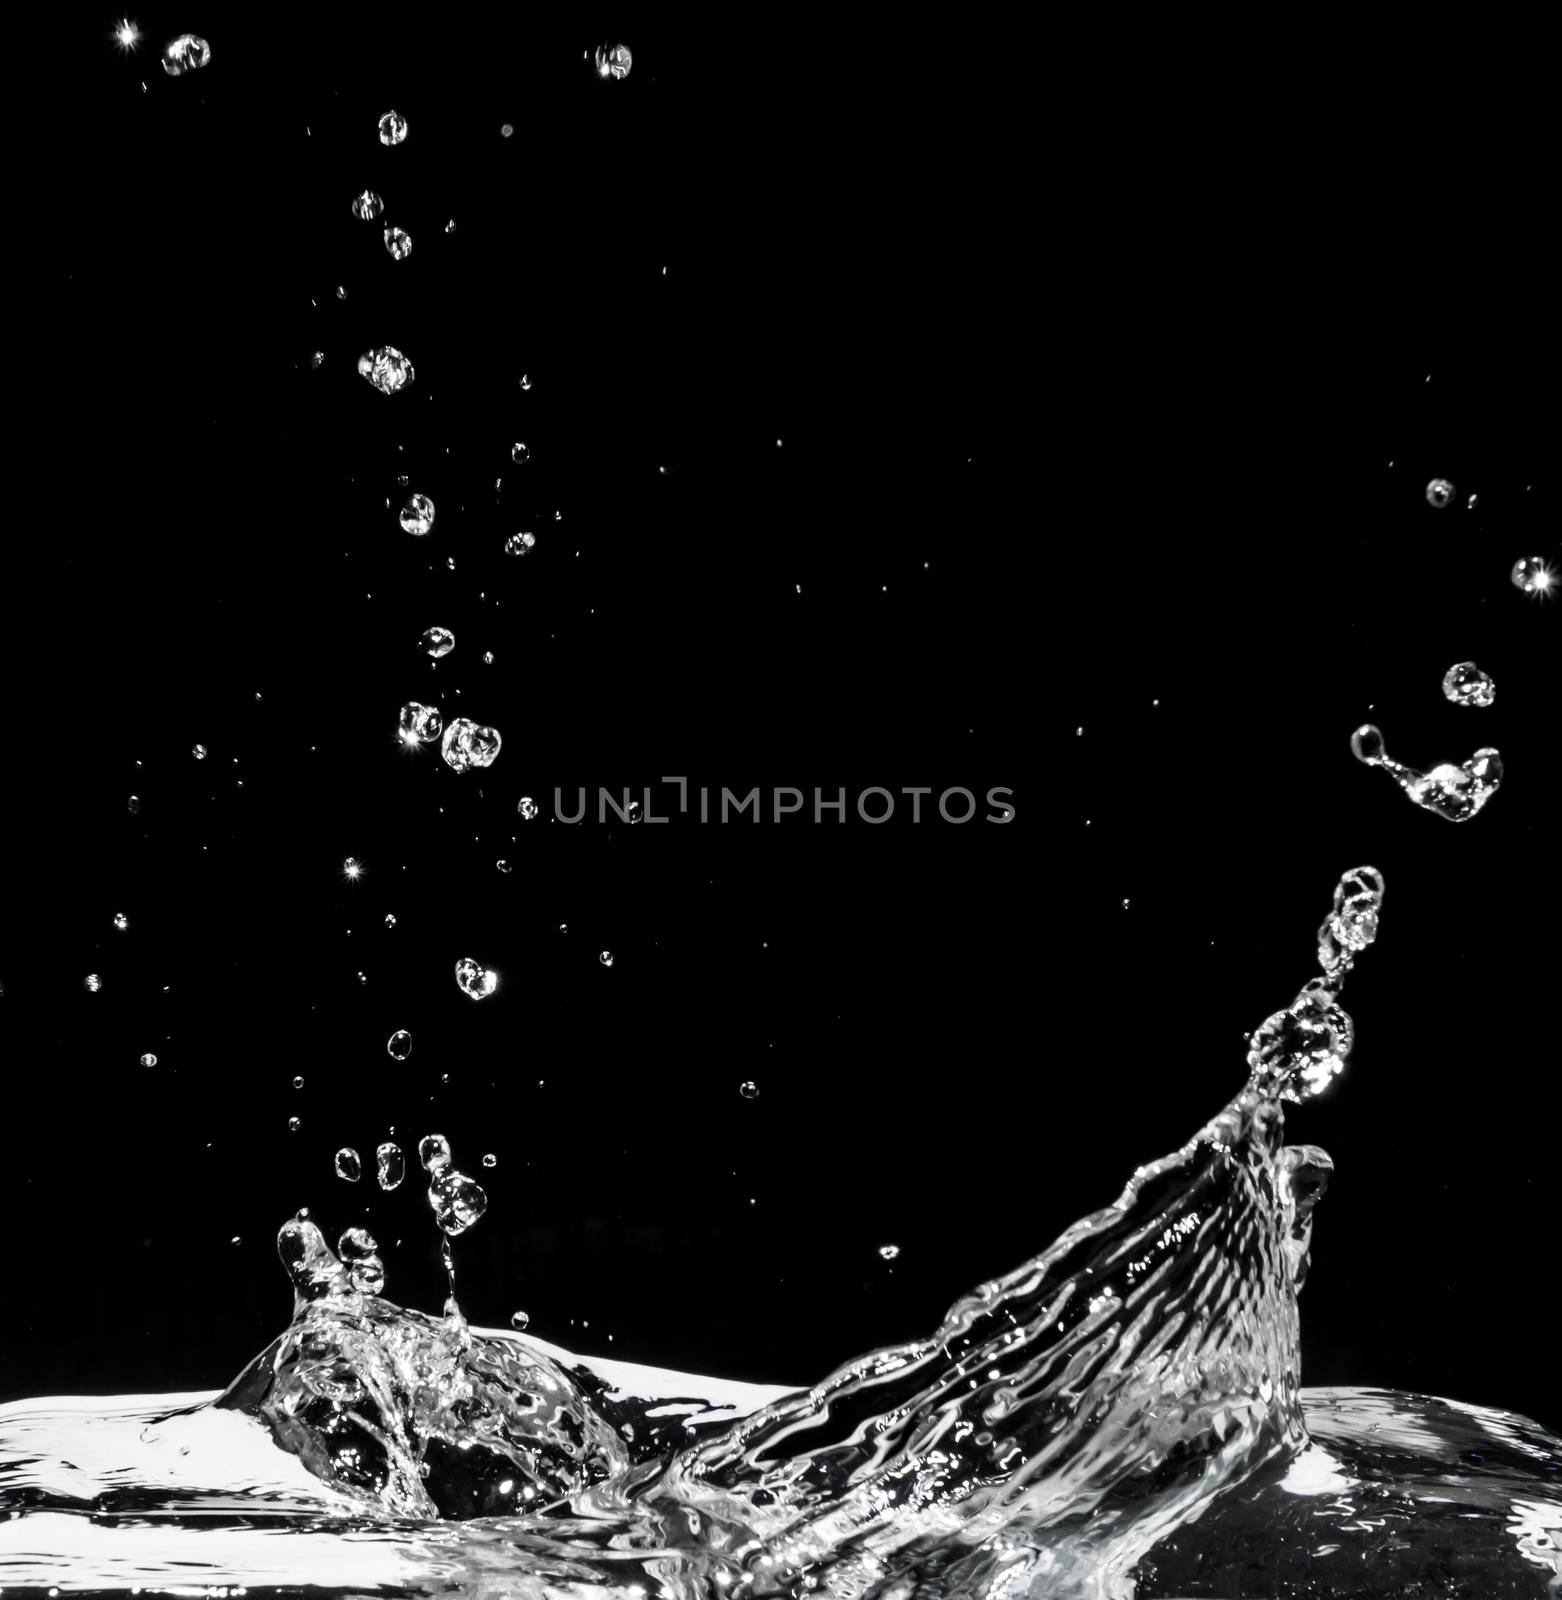 Water splash isolated on black background by ronnarong